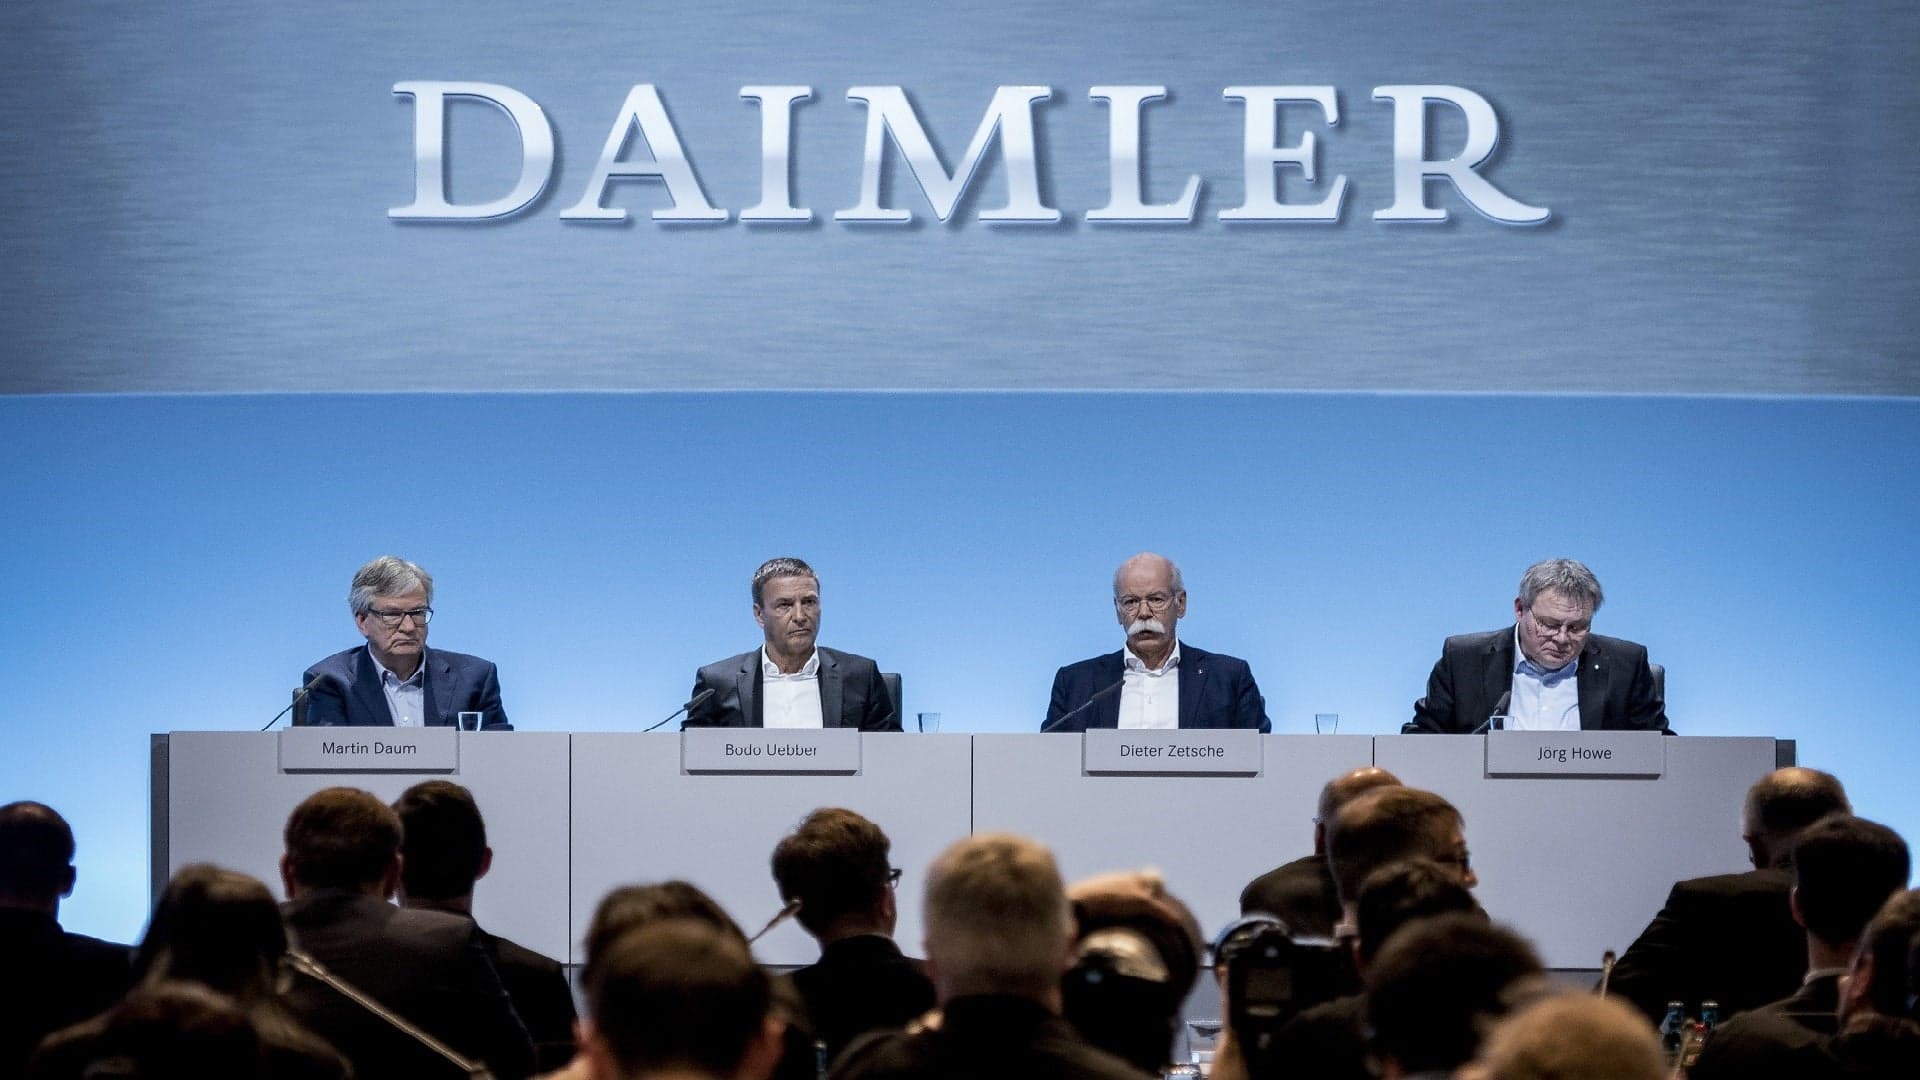 Daimler Crushes 2017 With Record Sales and Profits